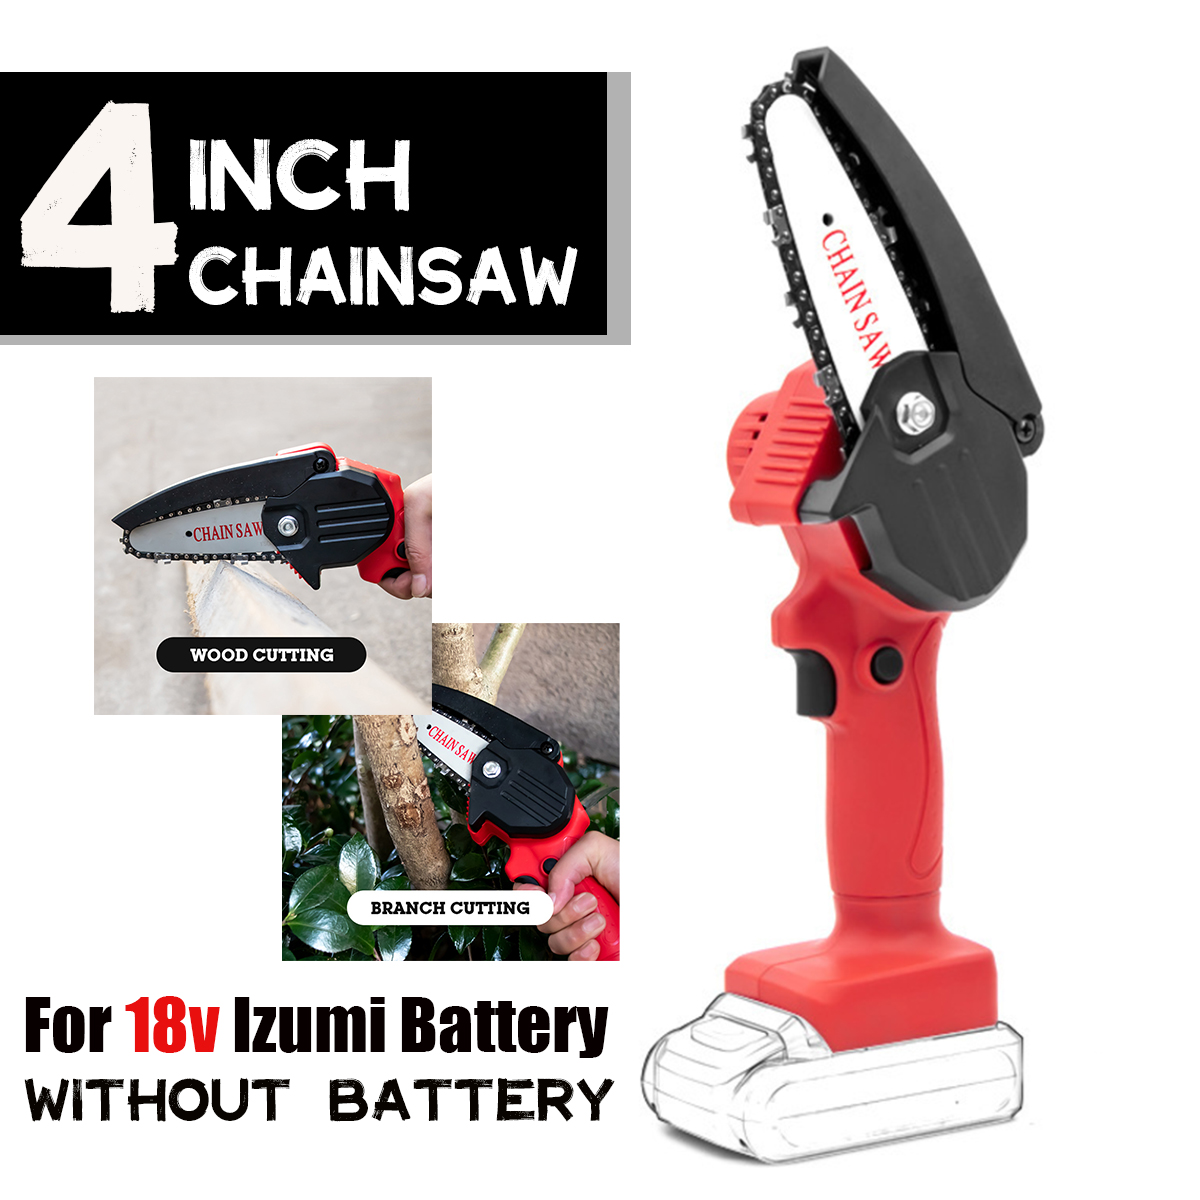 Portable-Electric-Saw-Woodworking-Chain-Saw-Tree-Pruning-Tool-for-18V-MakitaIzumi-Battery-1764621-3